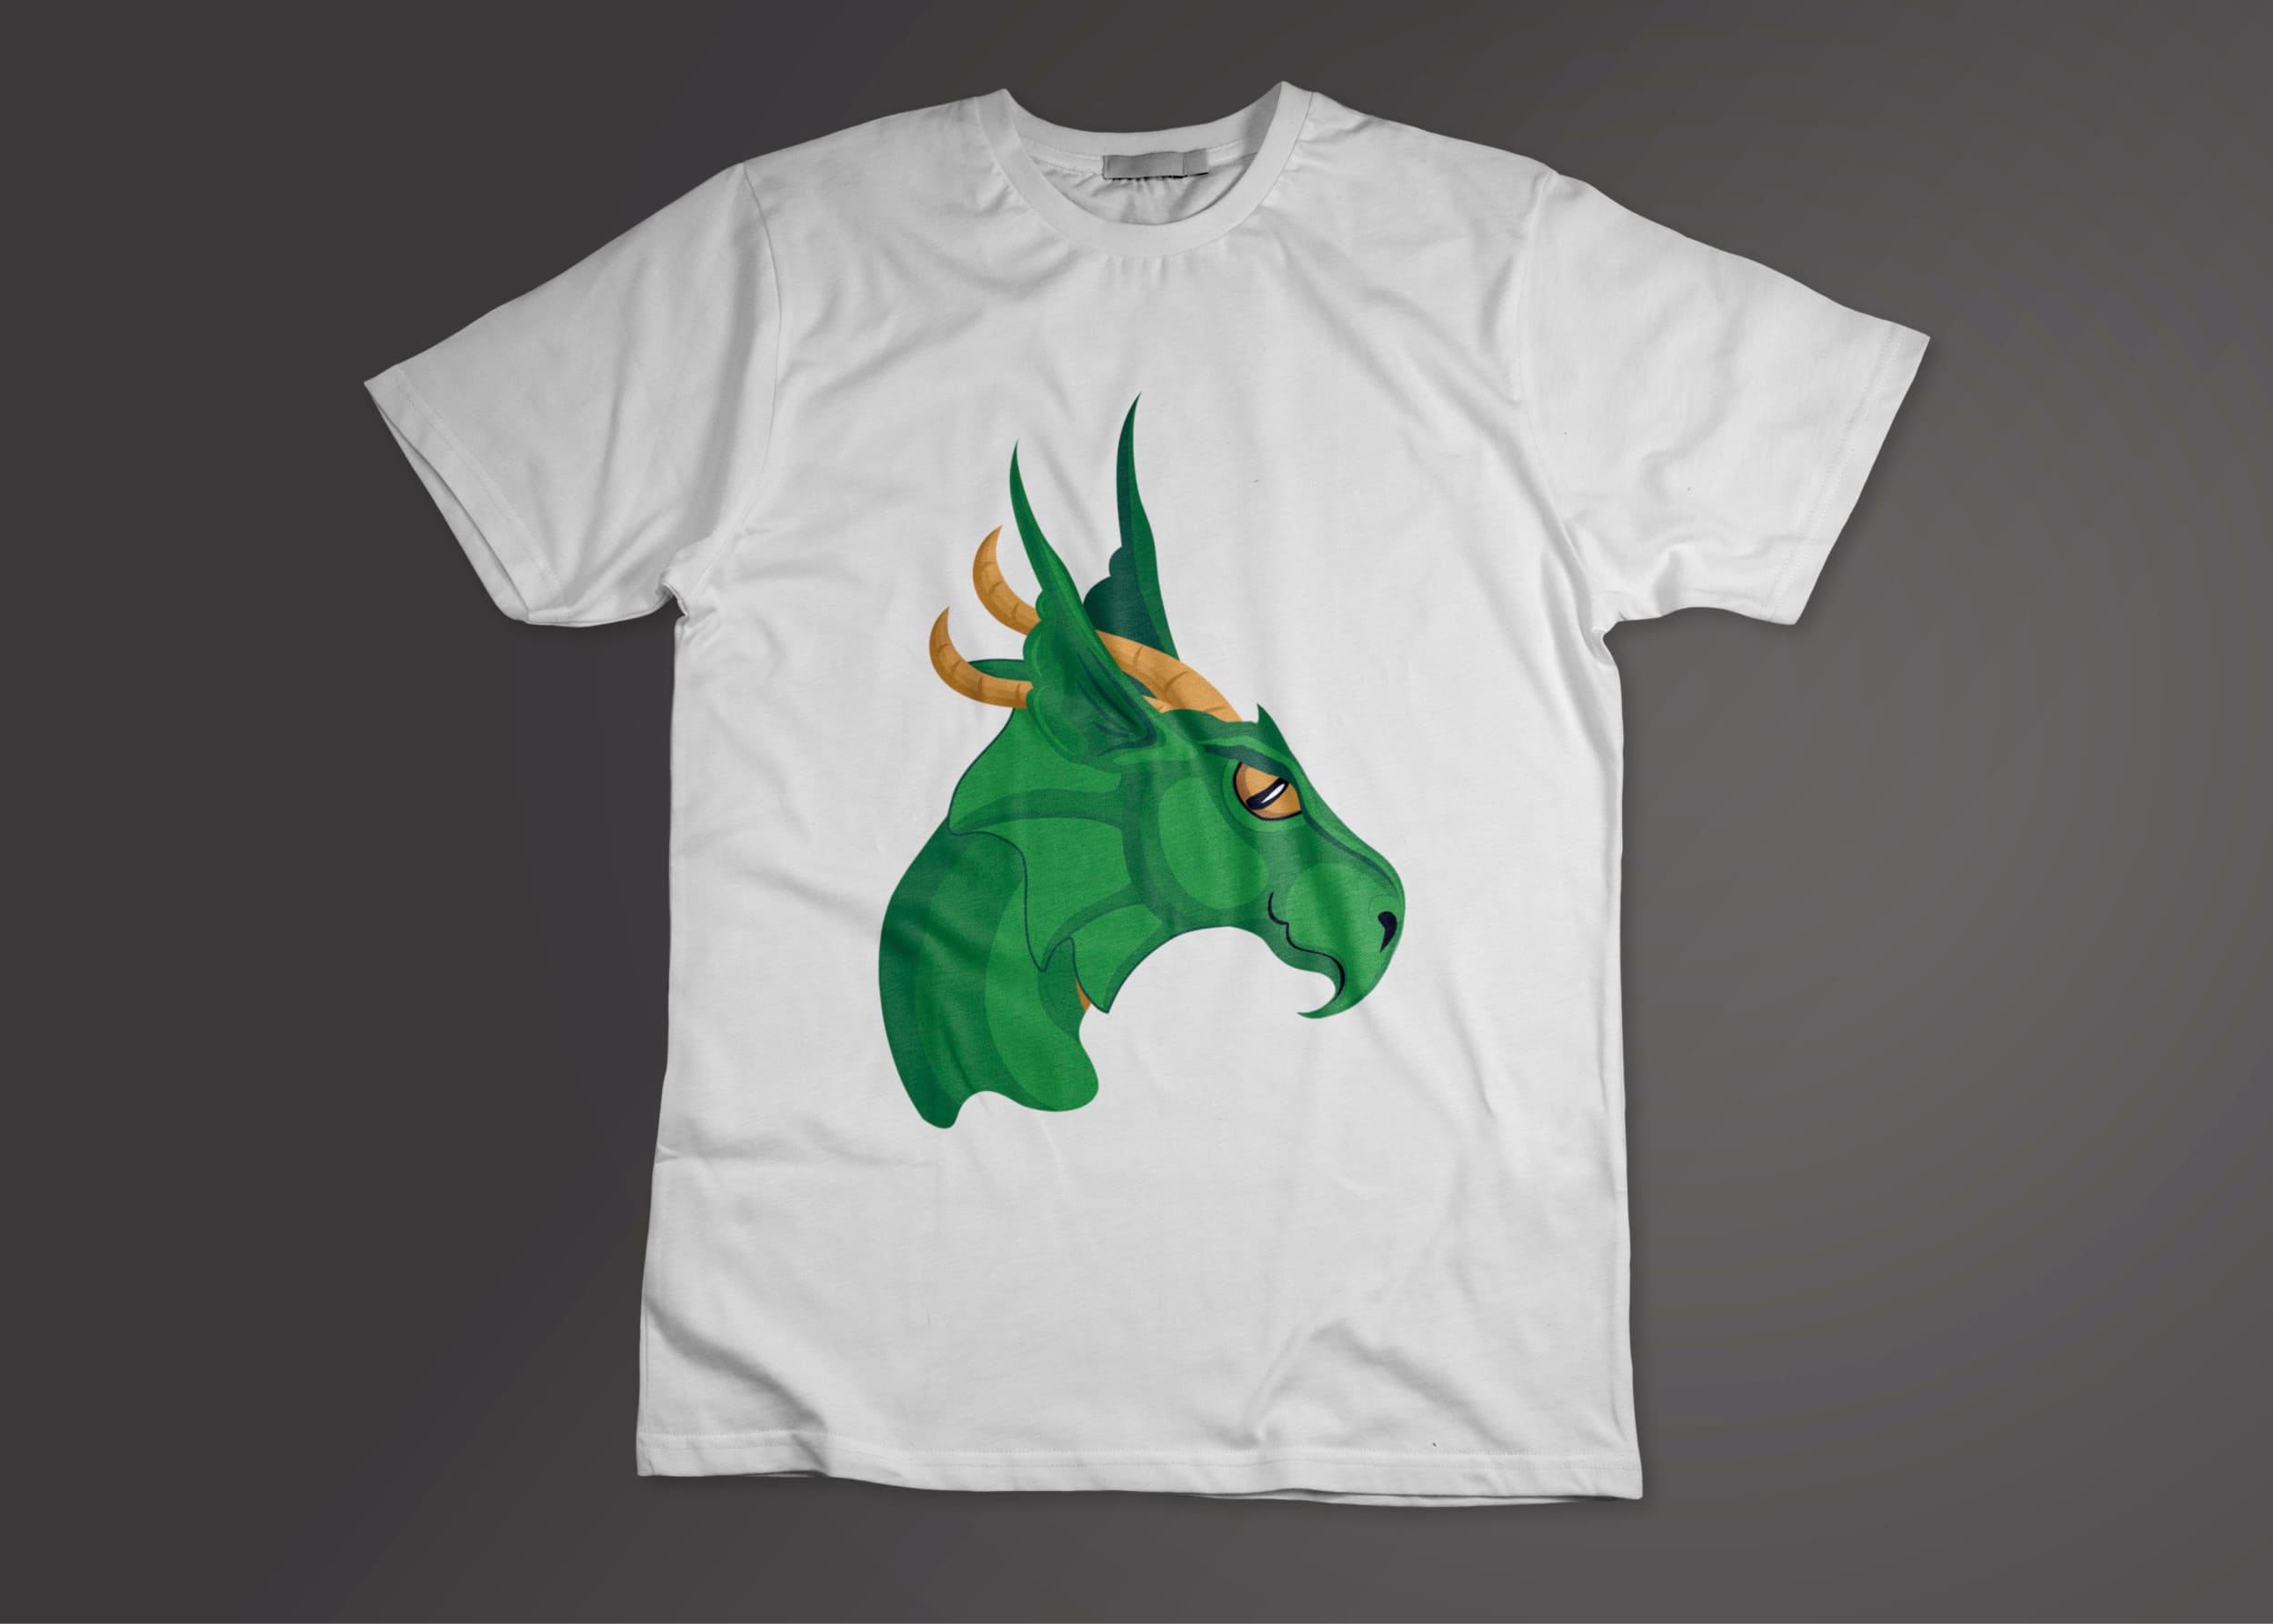 White T-shirt with a green dragon head on a dark gray background.